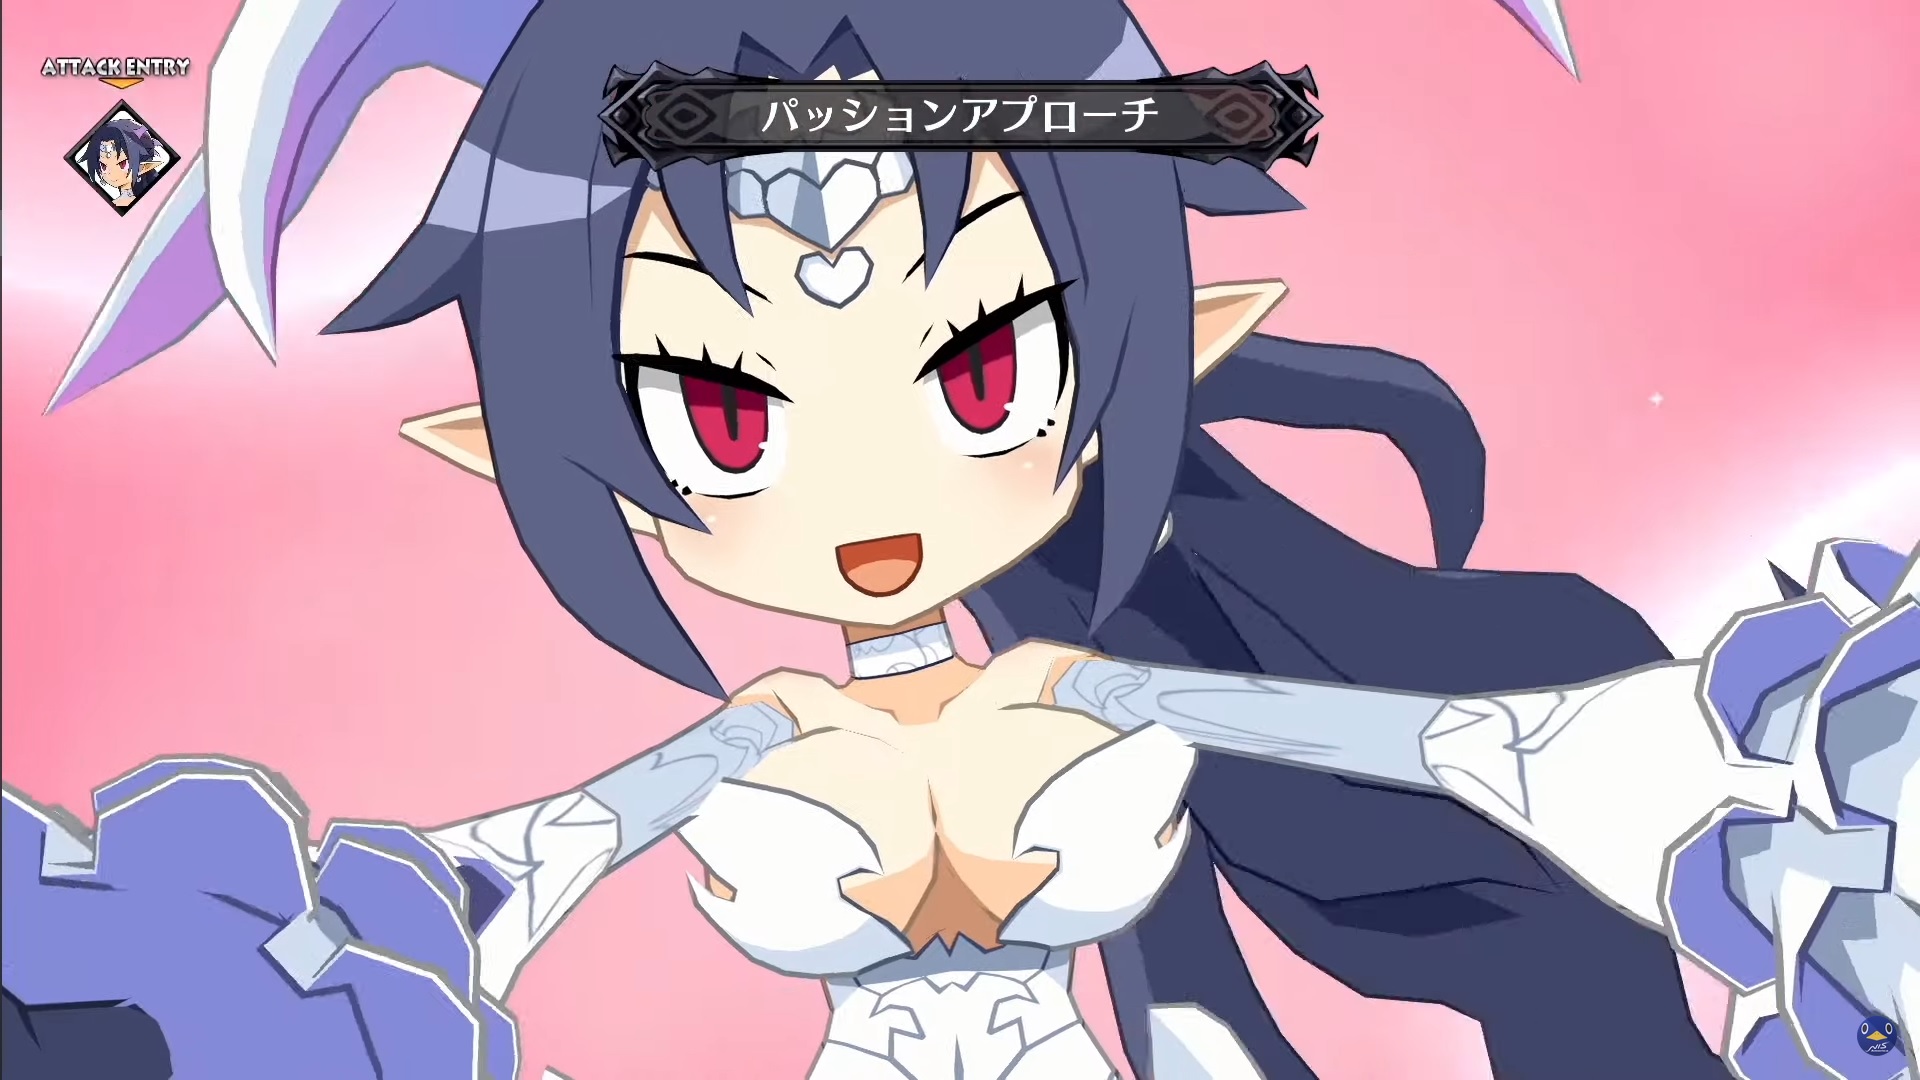 for android download Disgaea 6 Complete